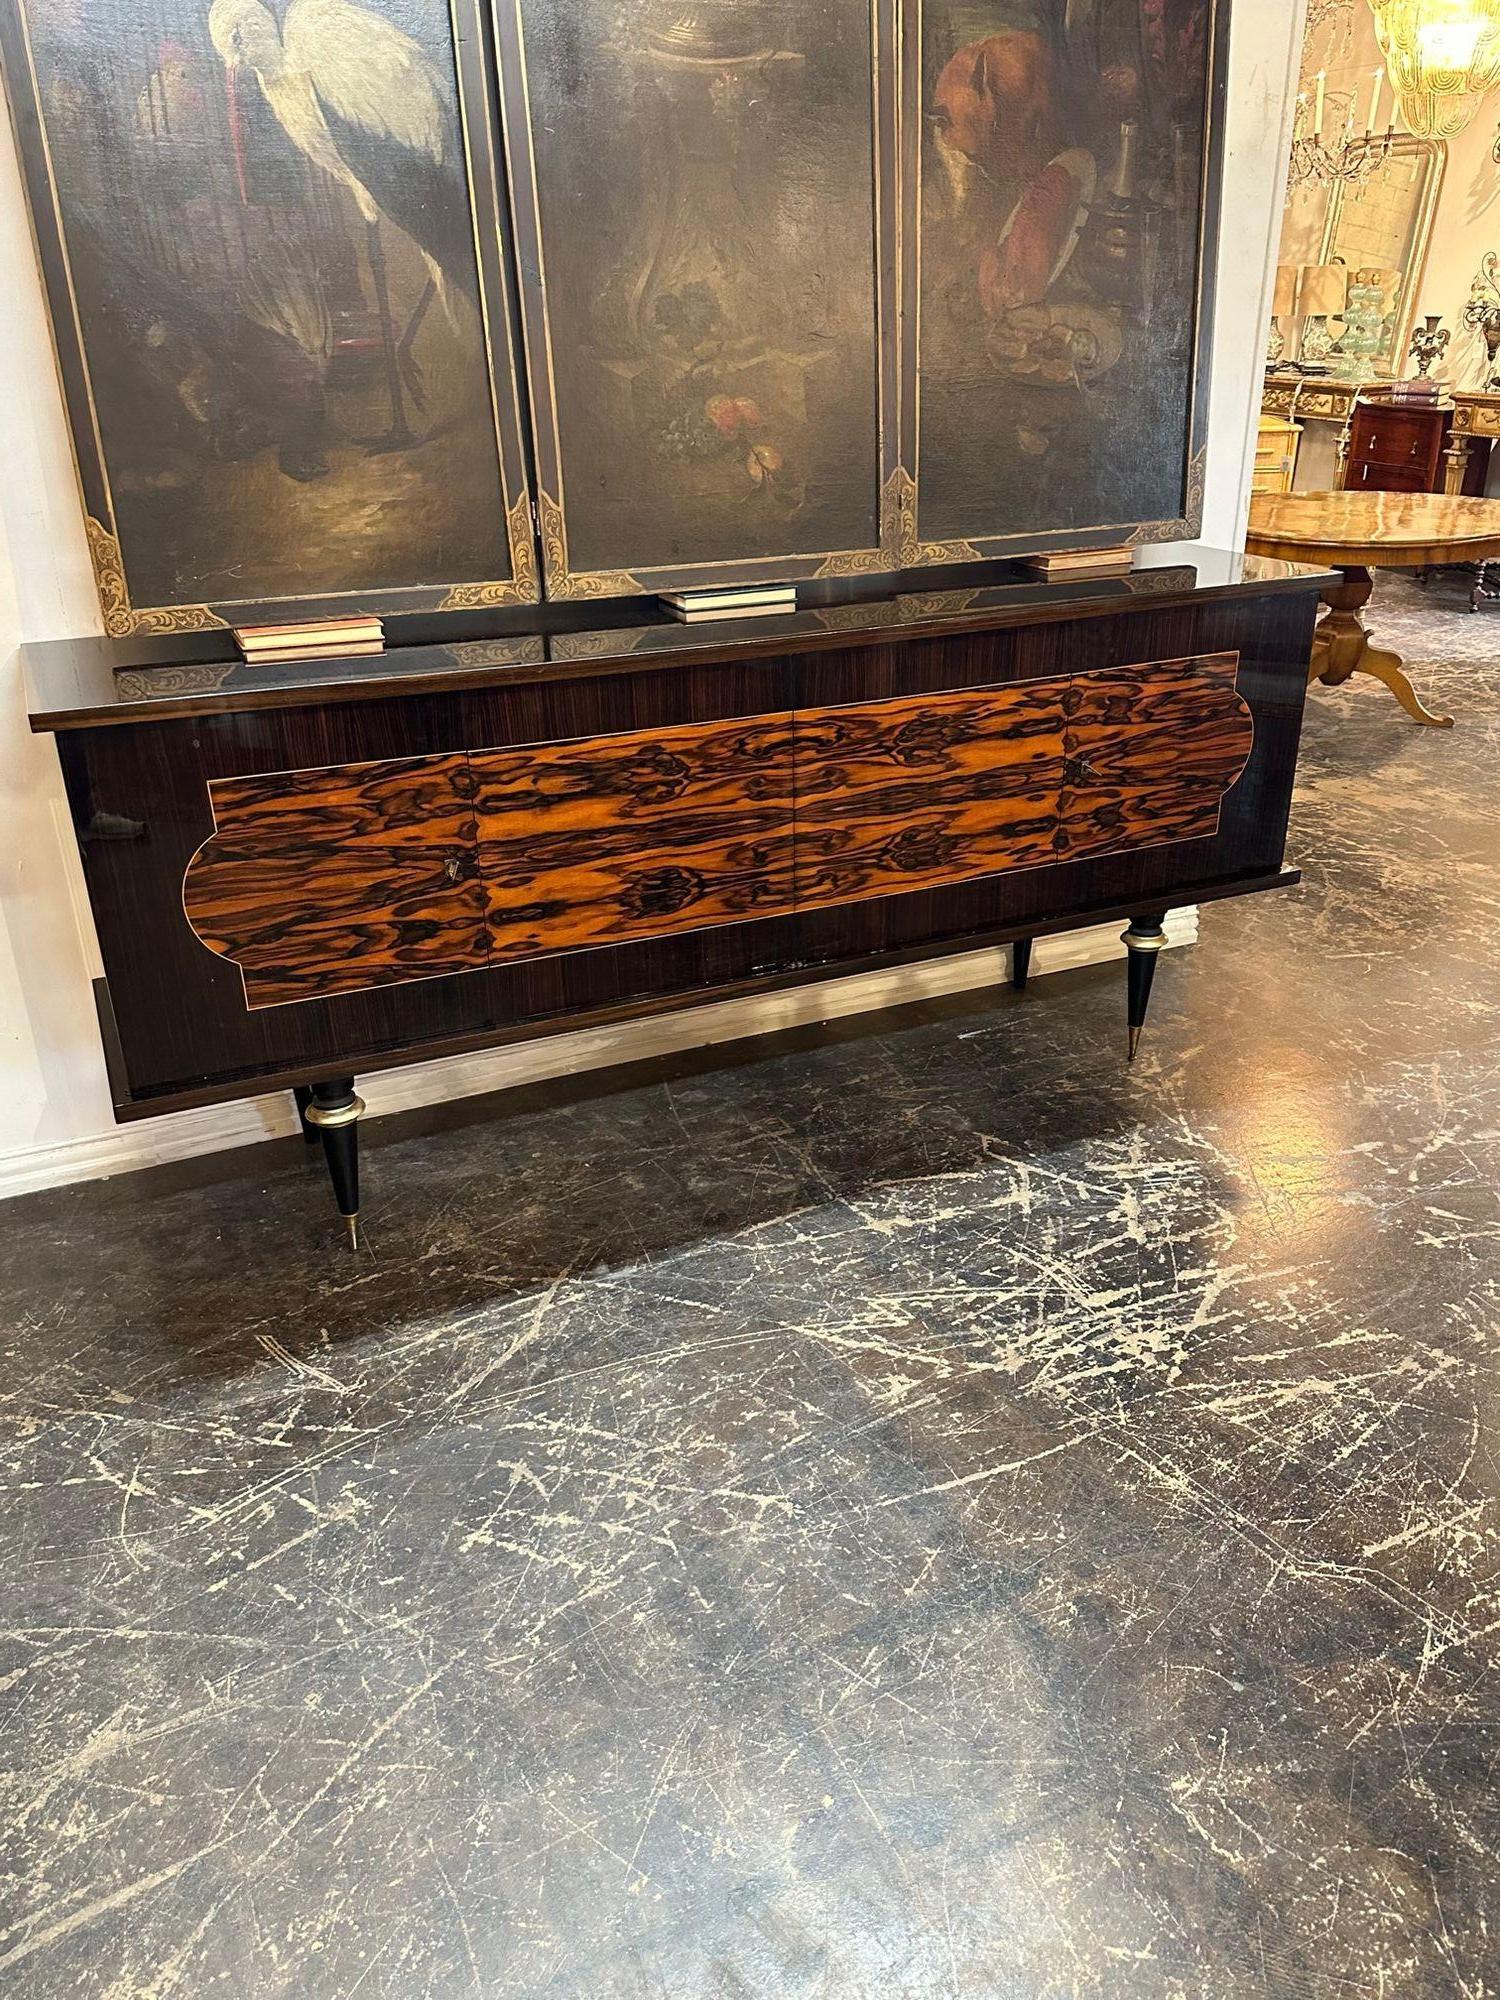 Outstanding German midcentury Art Deco inlaid rosewood sideboard, circa 1960. Perfect for today's transitional designs!